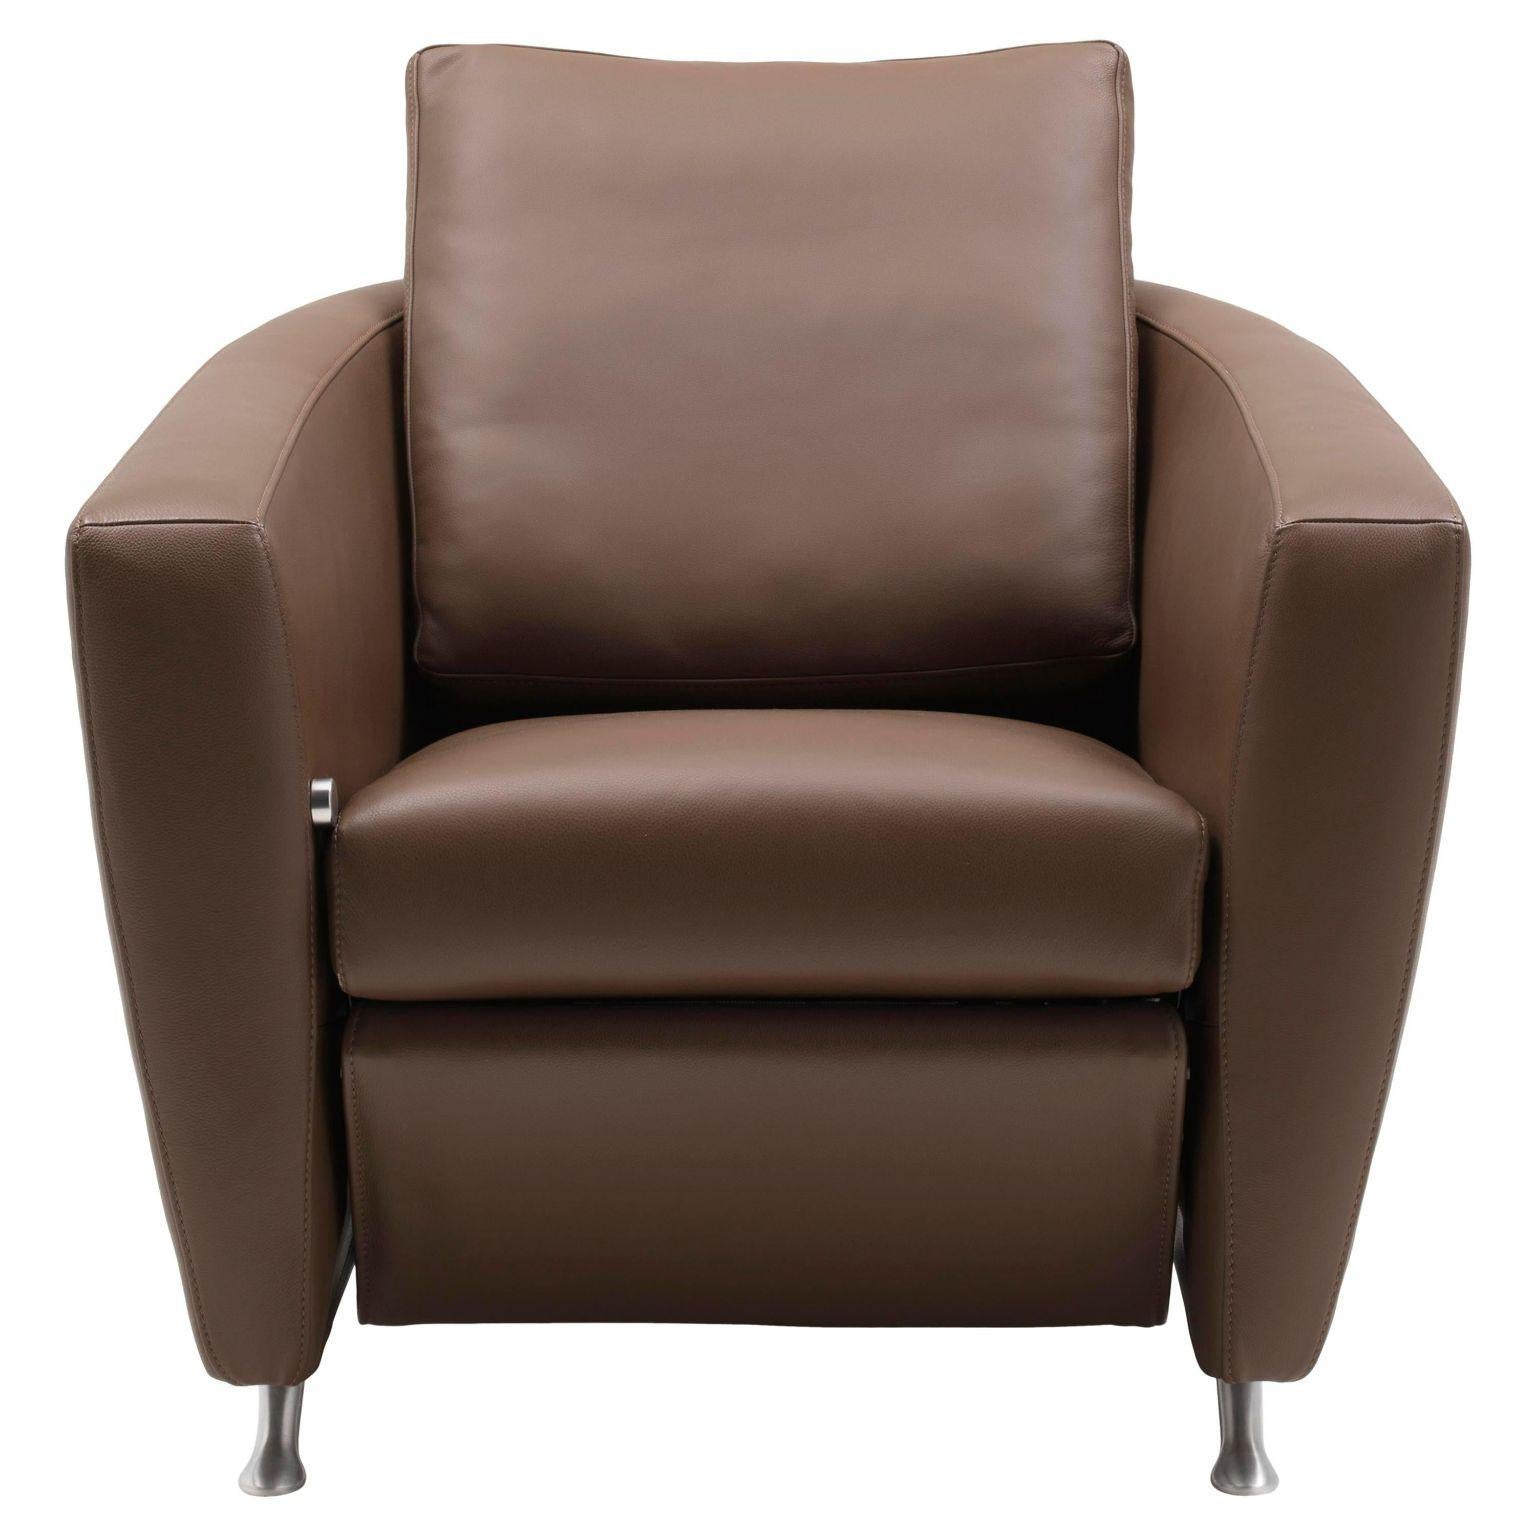 Sesam Adjustable Reclining Leather Armchair by FSM